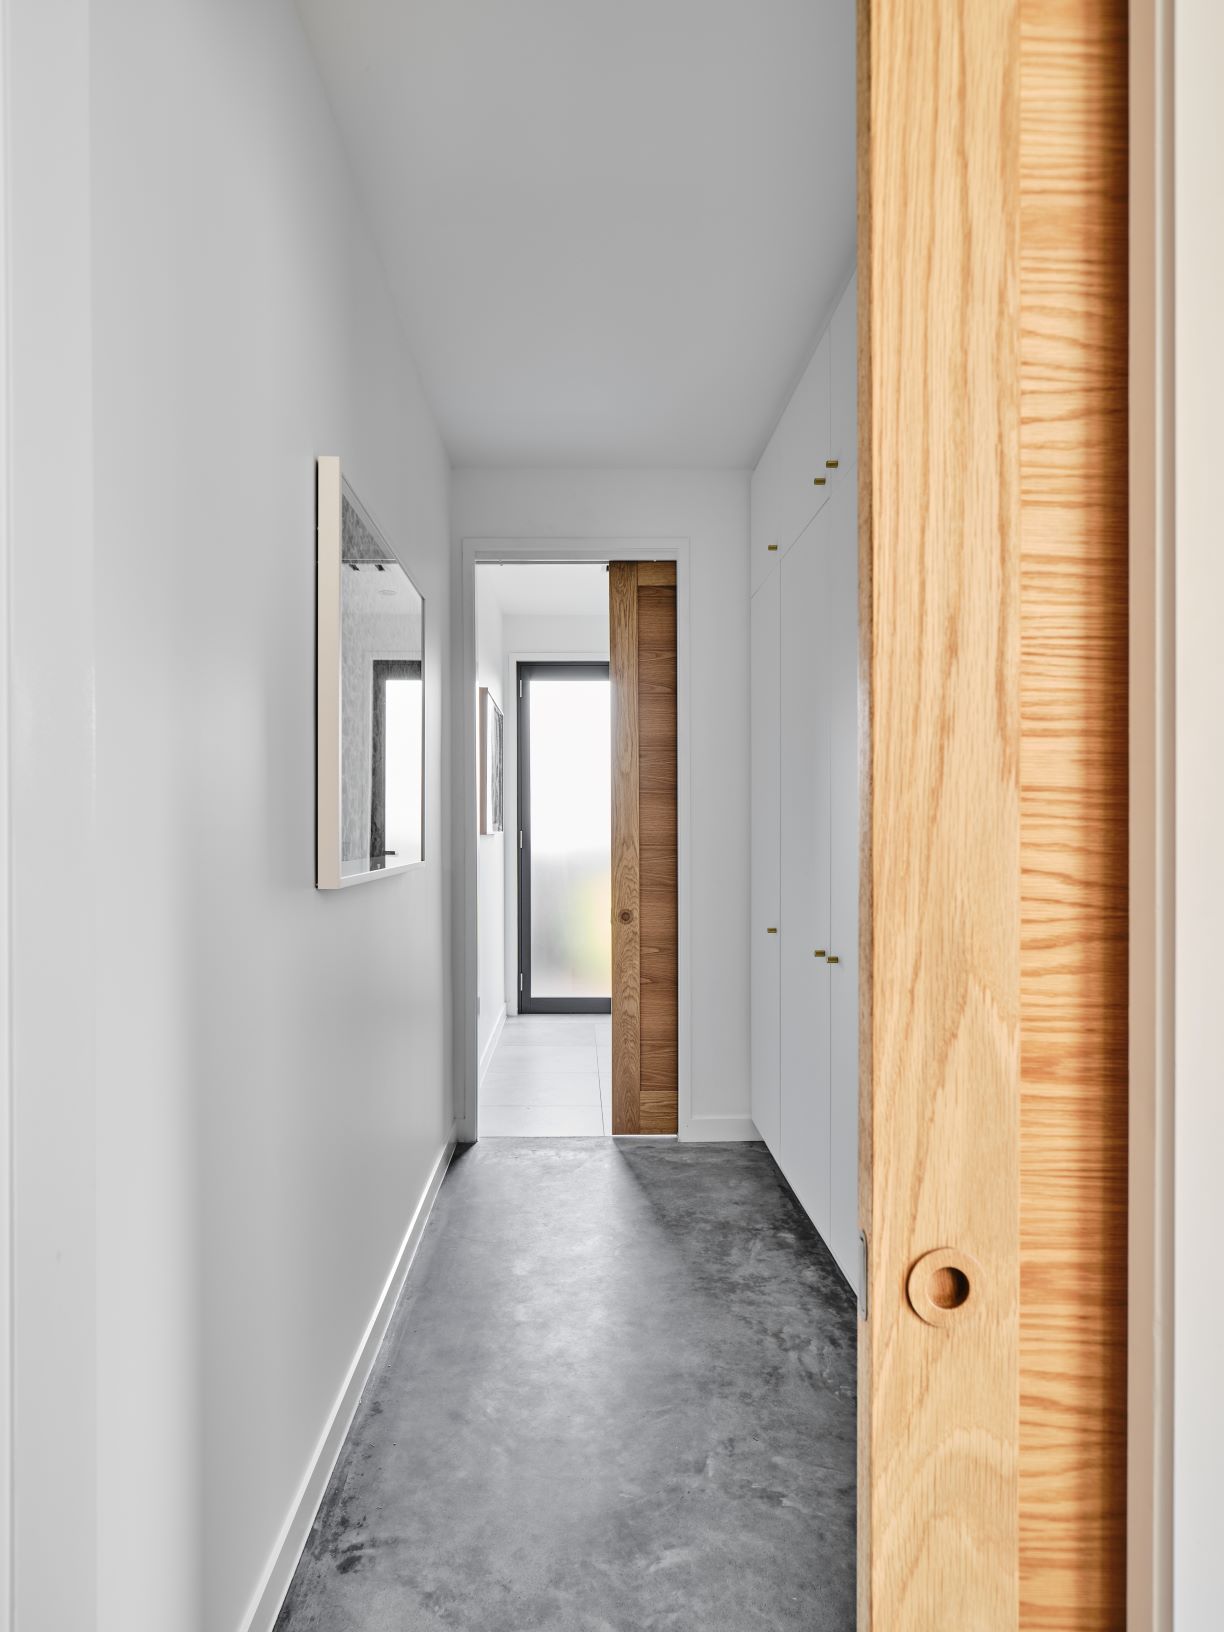 How to select the right interior door